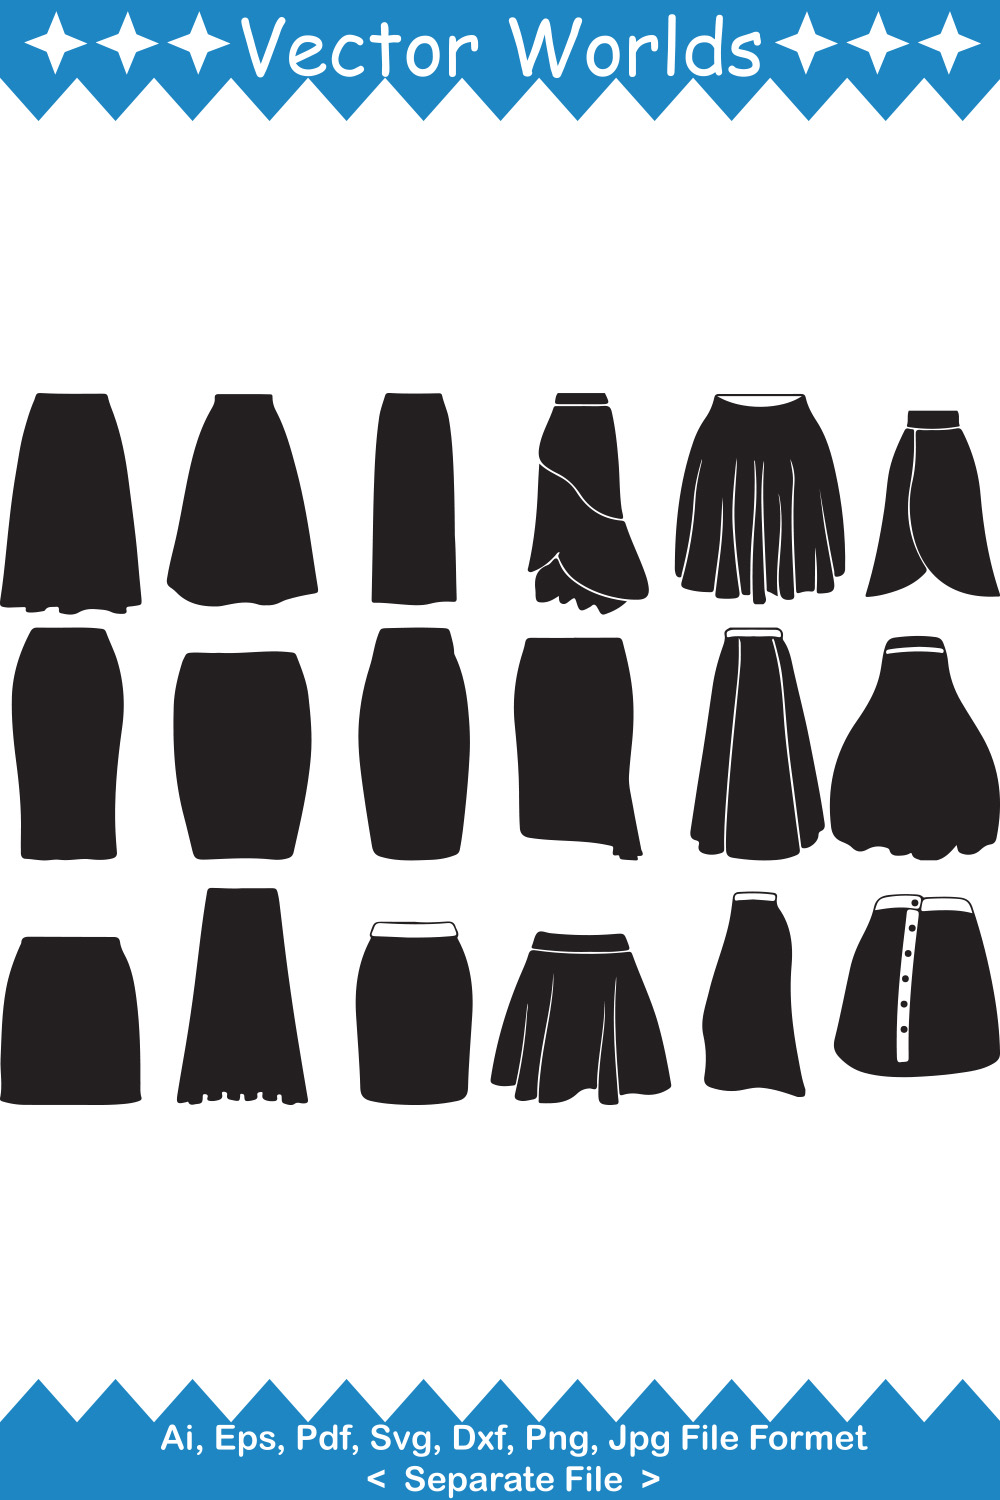 Set of vector wonderful images of silhouettes of long skirts.